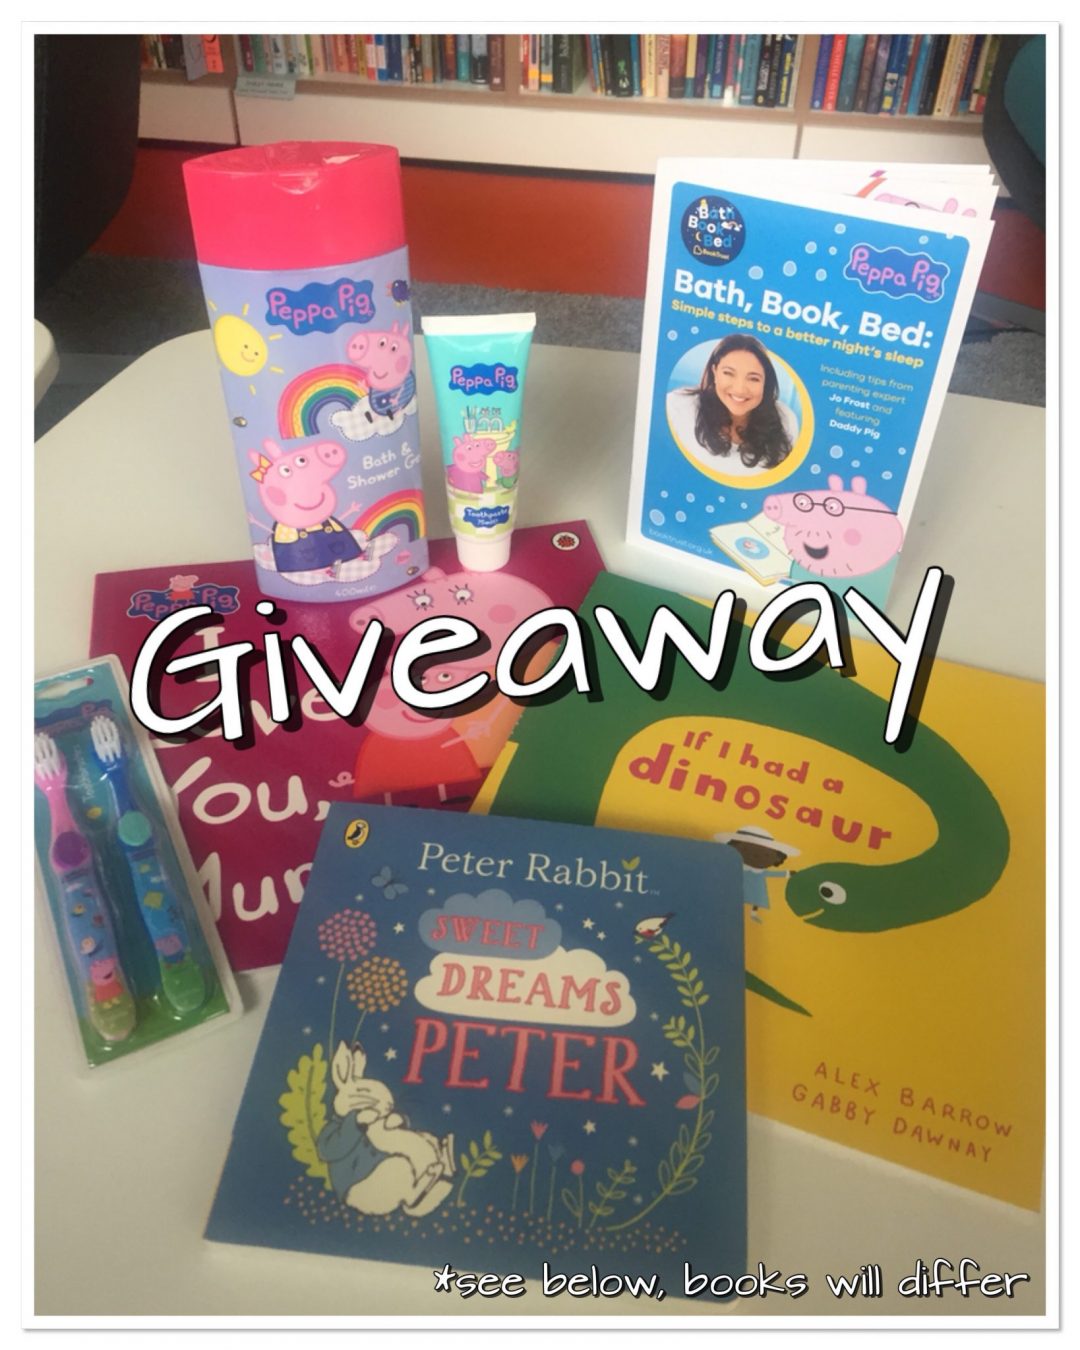 Win Peppa Pig and Book Trust Goody Bag as shown to help with Bath, Book, Bed bedtime routine, in collaboration with Book Trust 2018, Jo Frost Supernanny and Peppa Pig - well, daddy Pig’s wisdom! 